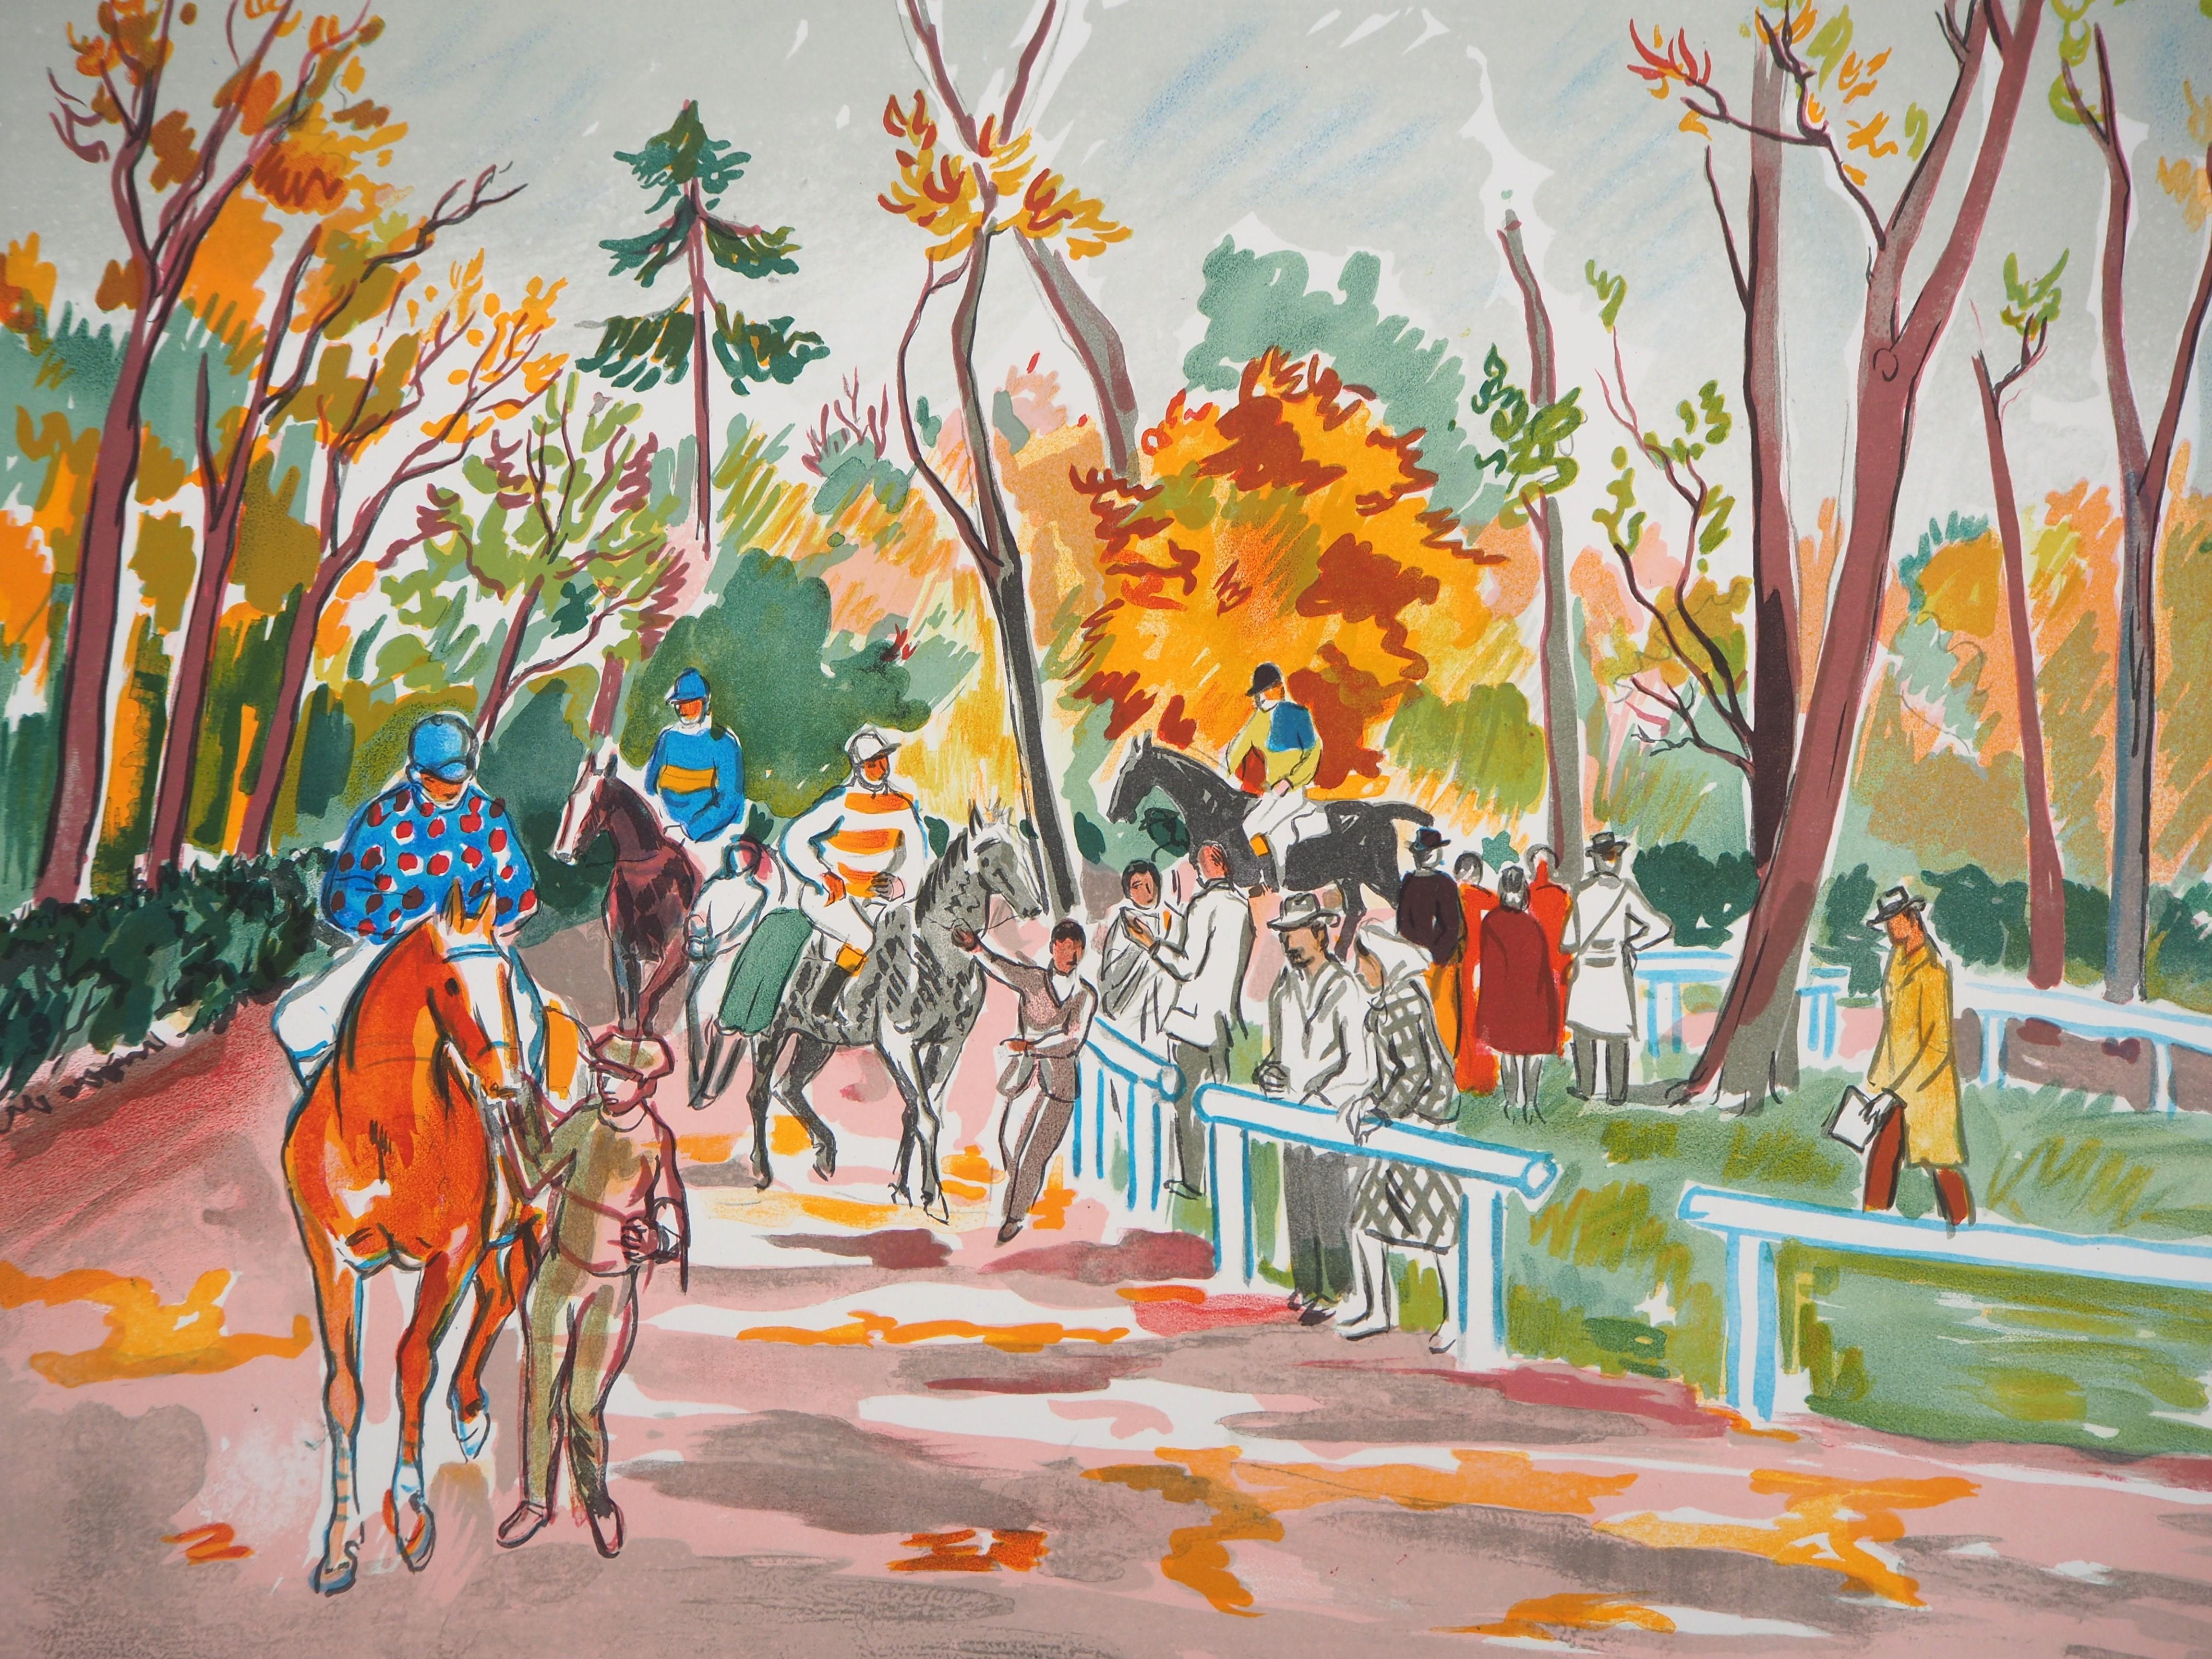 Horseback Riding in the Forest - Original Lithograph Handsigned Numbered - Print by Yves Brayer